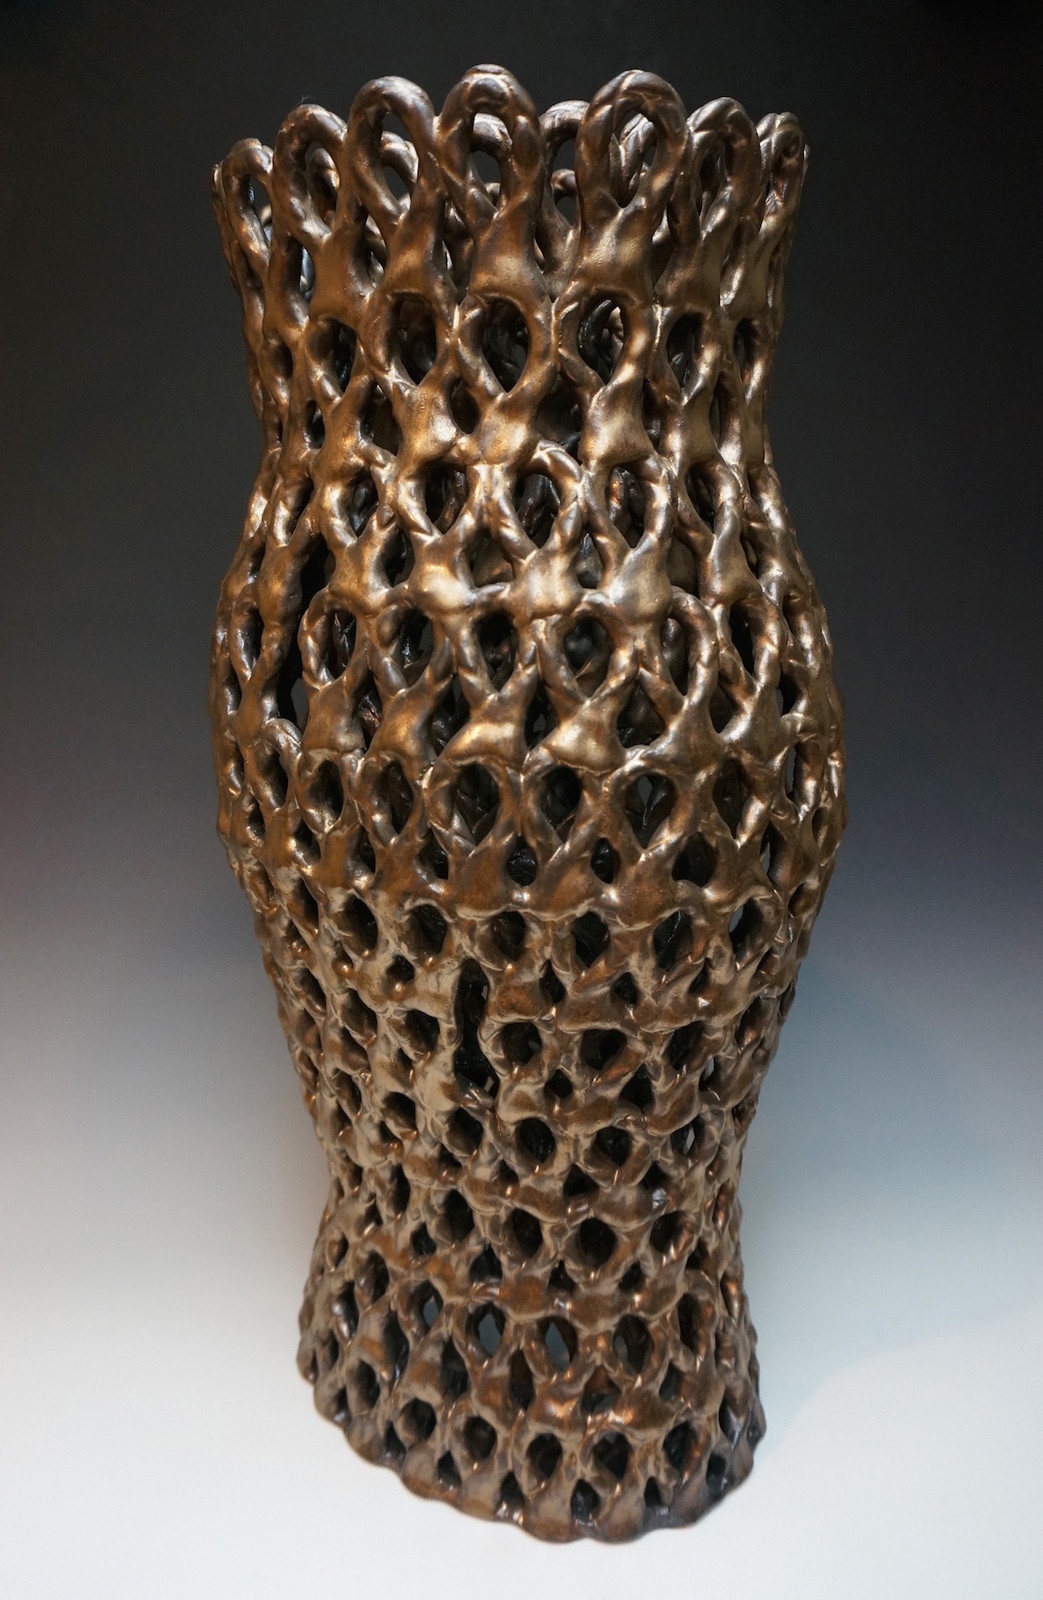 An intricately looped/patterned vessel, curving out slightly at the middle, in a rich golden-brown hue.